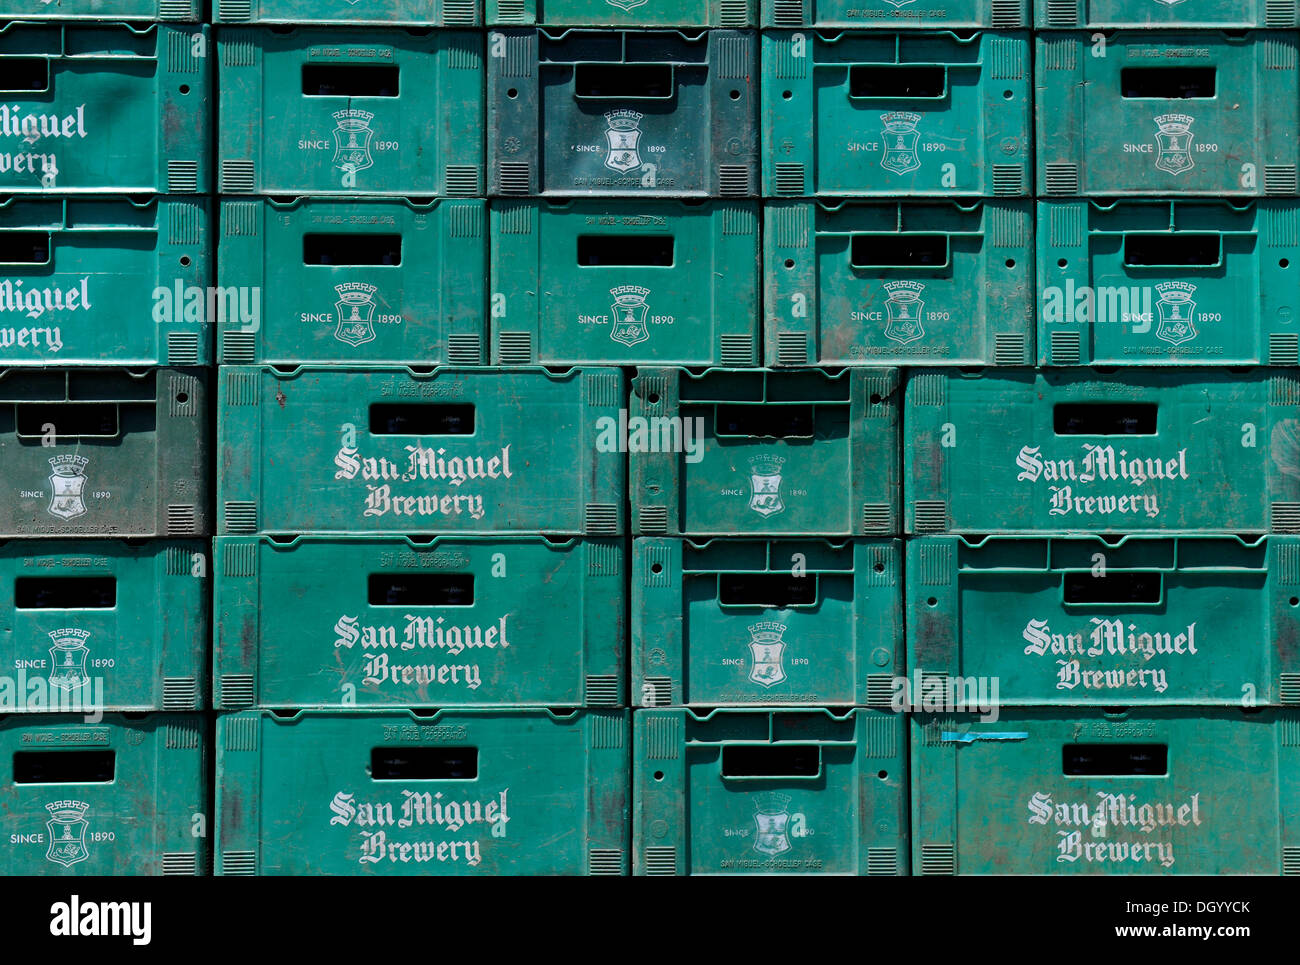 San Miguel beer crates, Cebu, Philippines, Southeast Asia, Asia Stock Photo